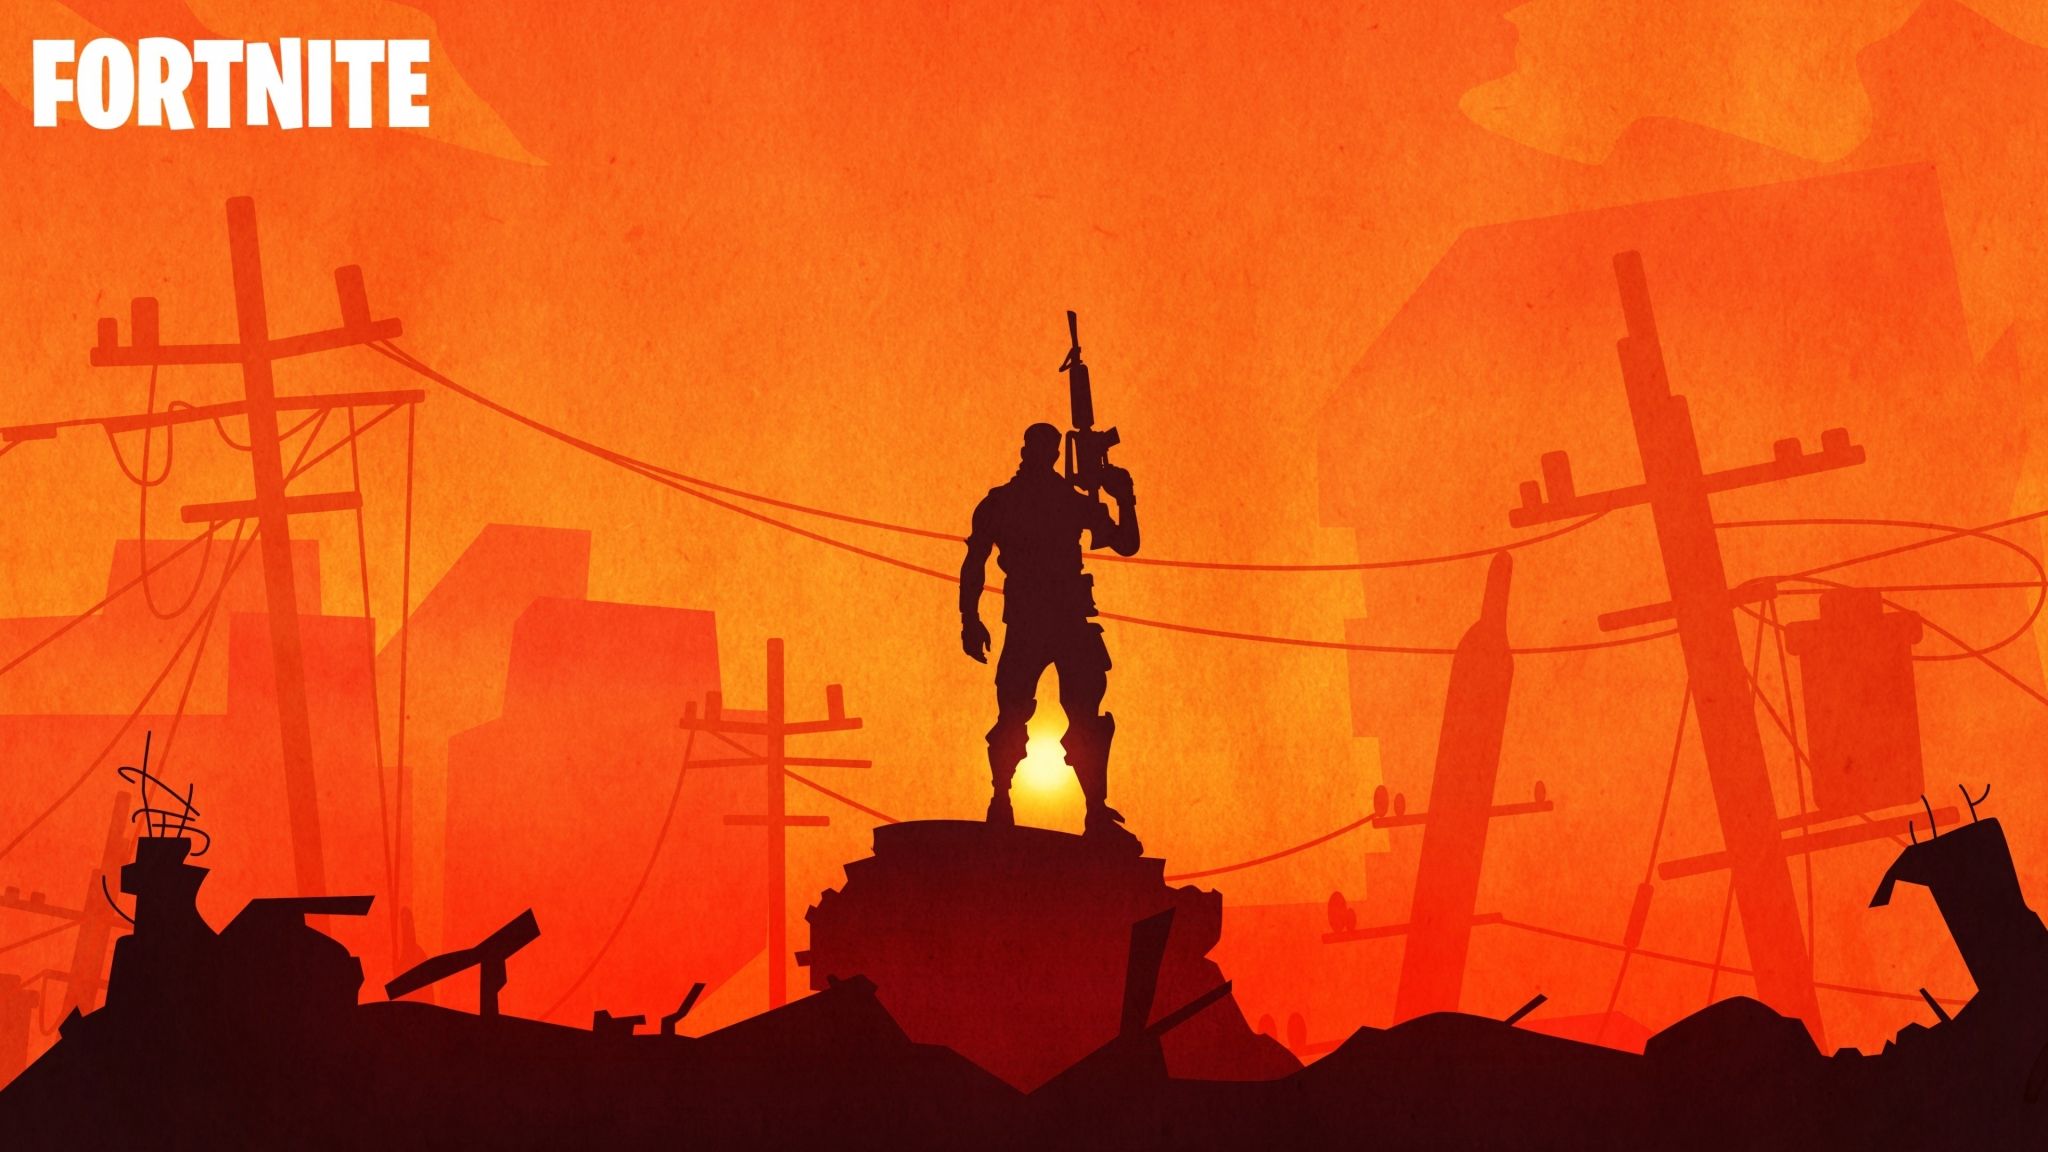 Download Fortnite Warrior Silhouette In Sunset Ultra Wide monitor